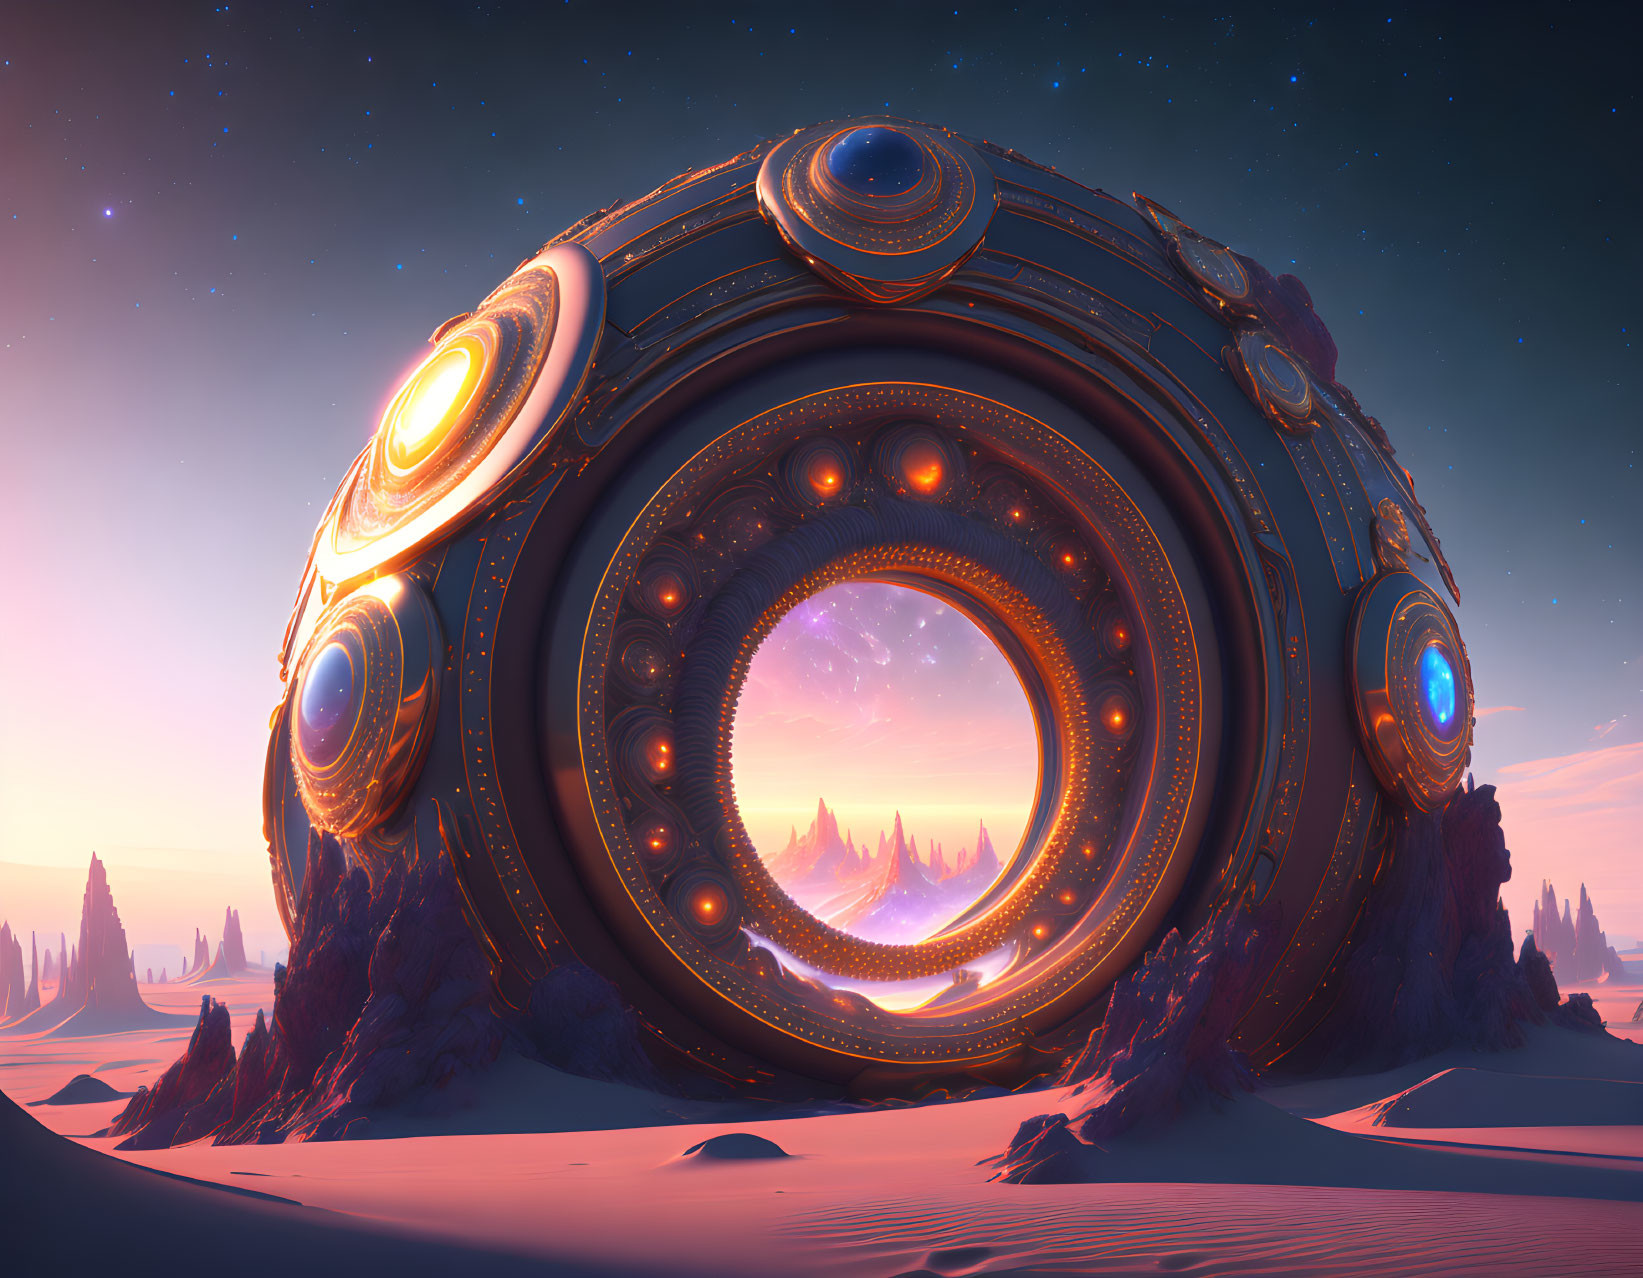 Futuristic spherical structure with glowing orange and blue elements on alien desert landscape